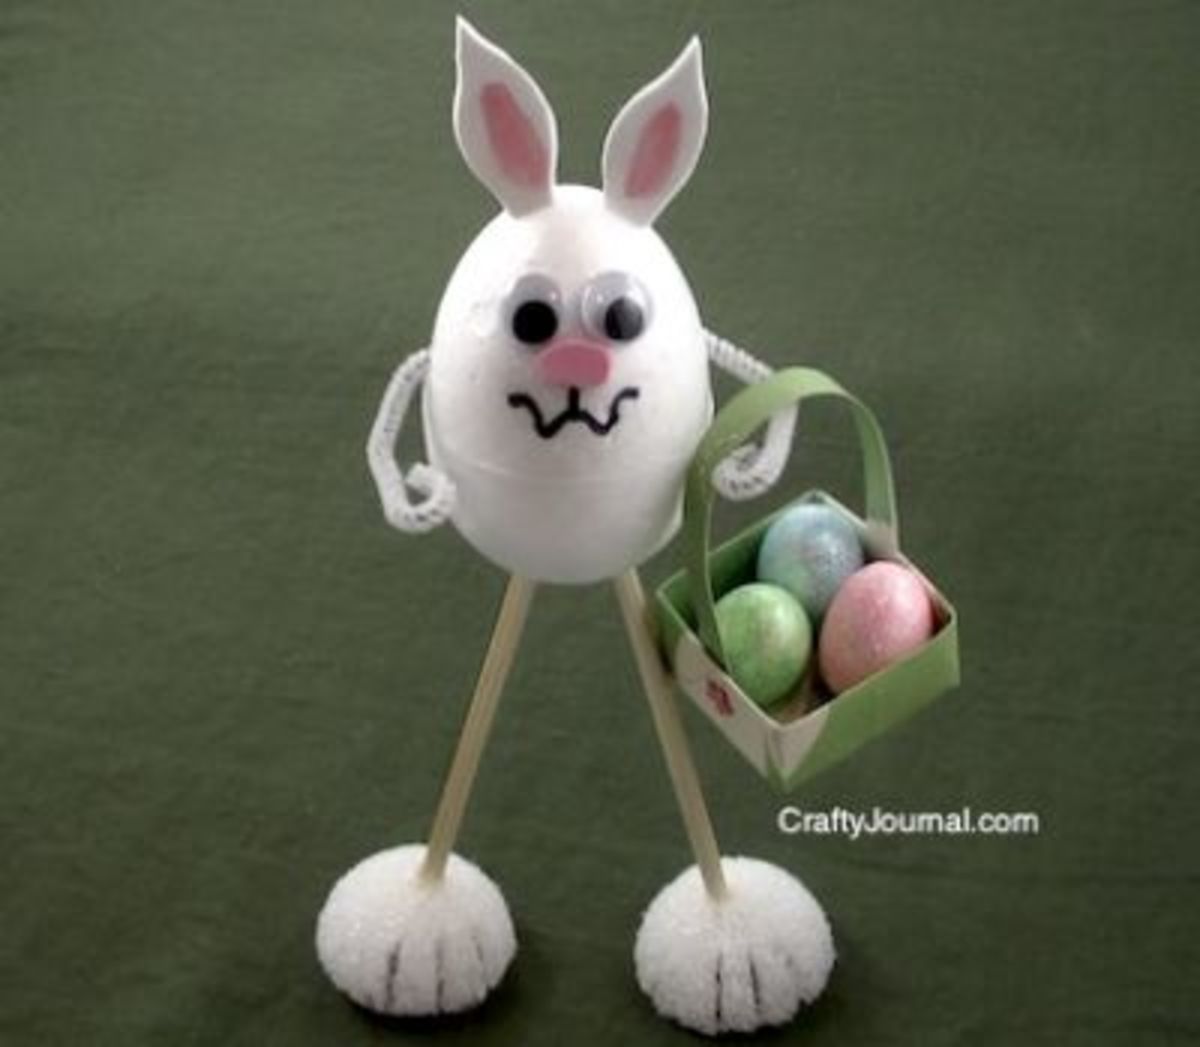 bunny-crafts-and-how-to-make-them